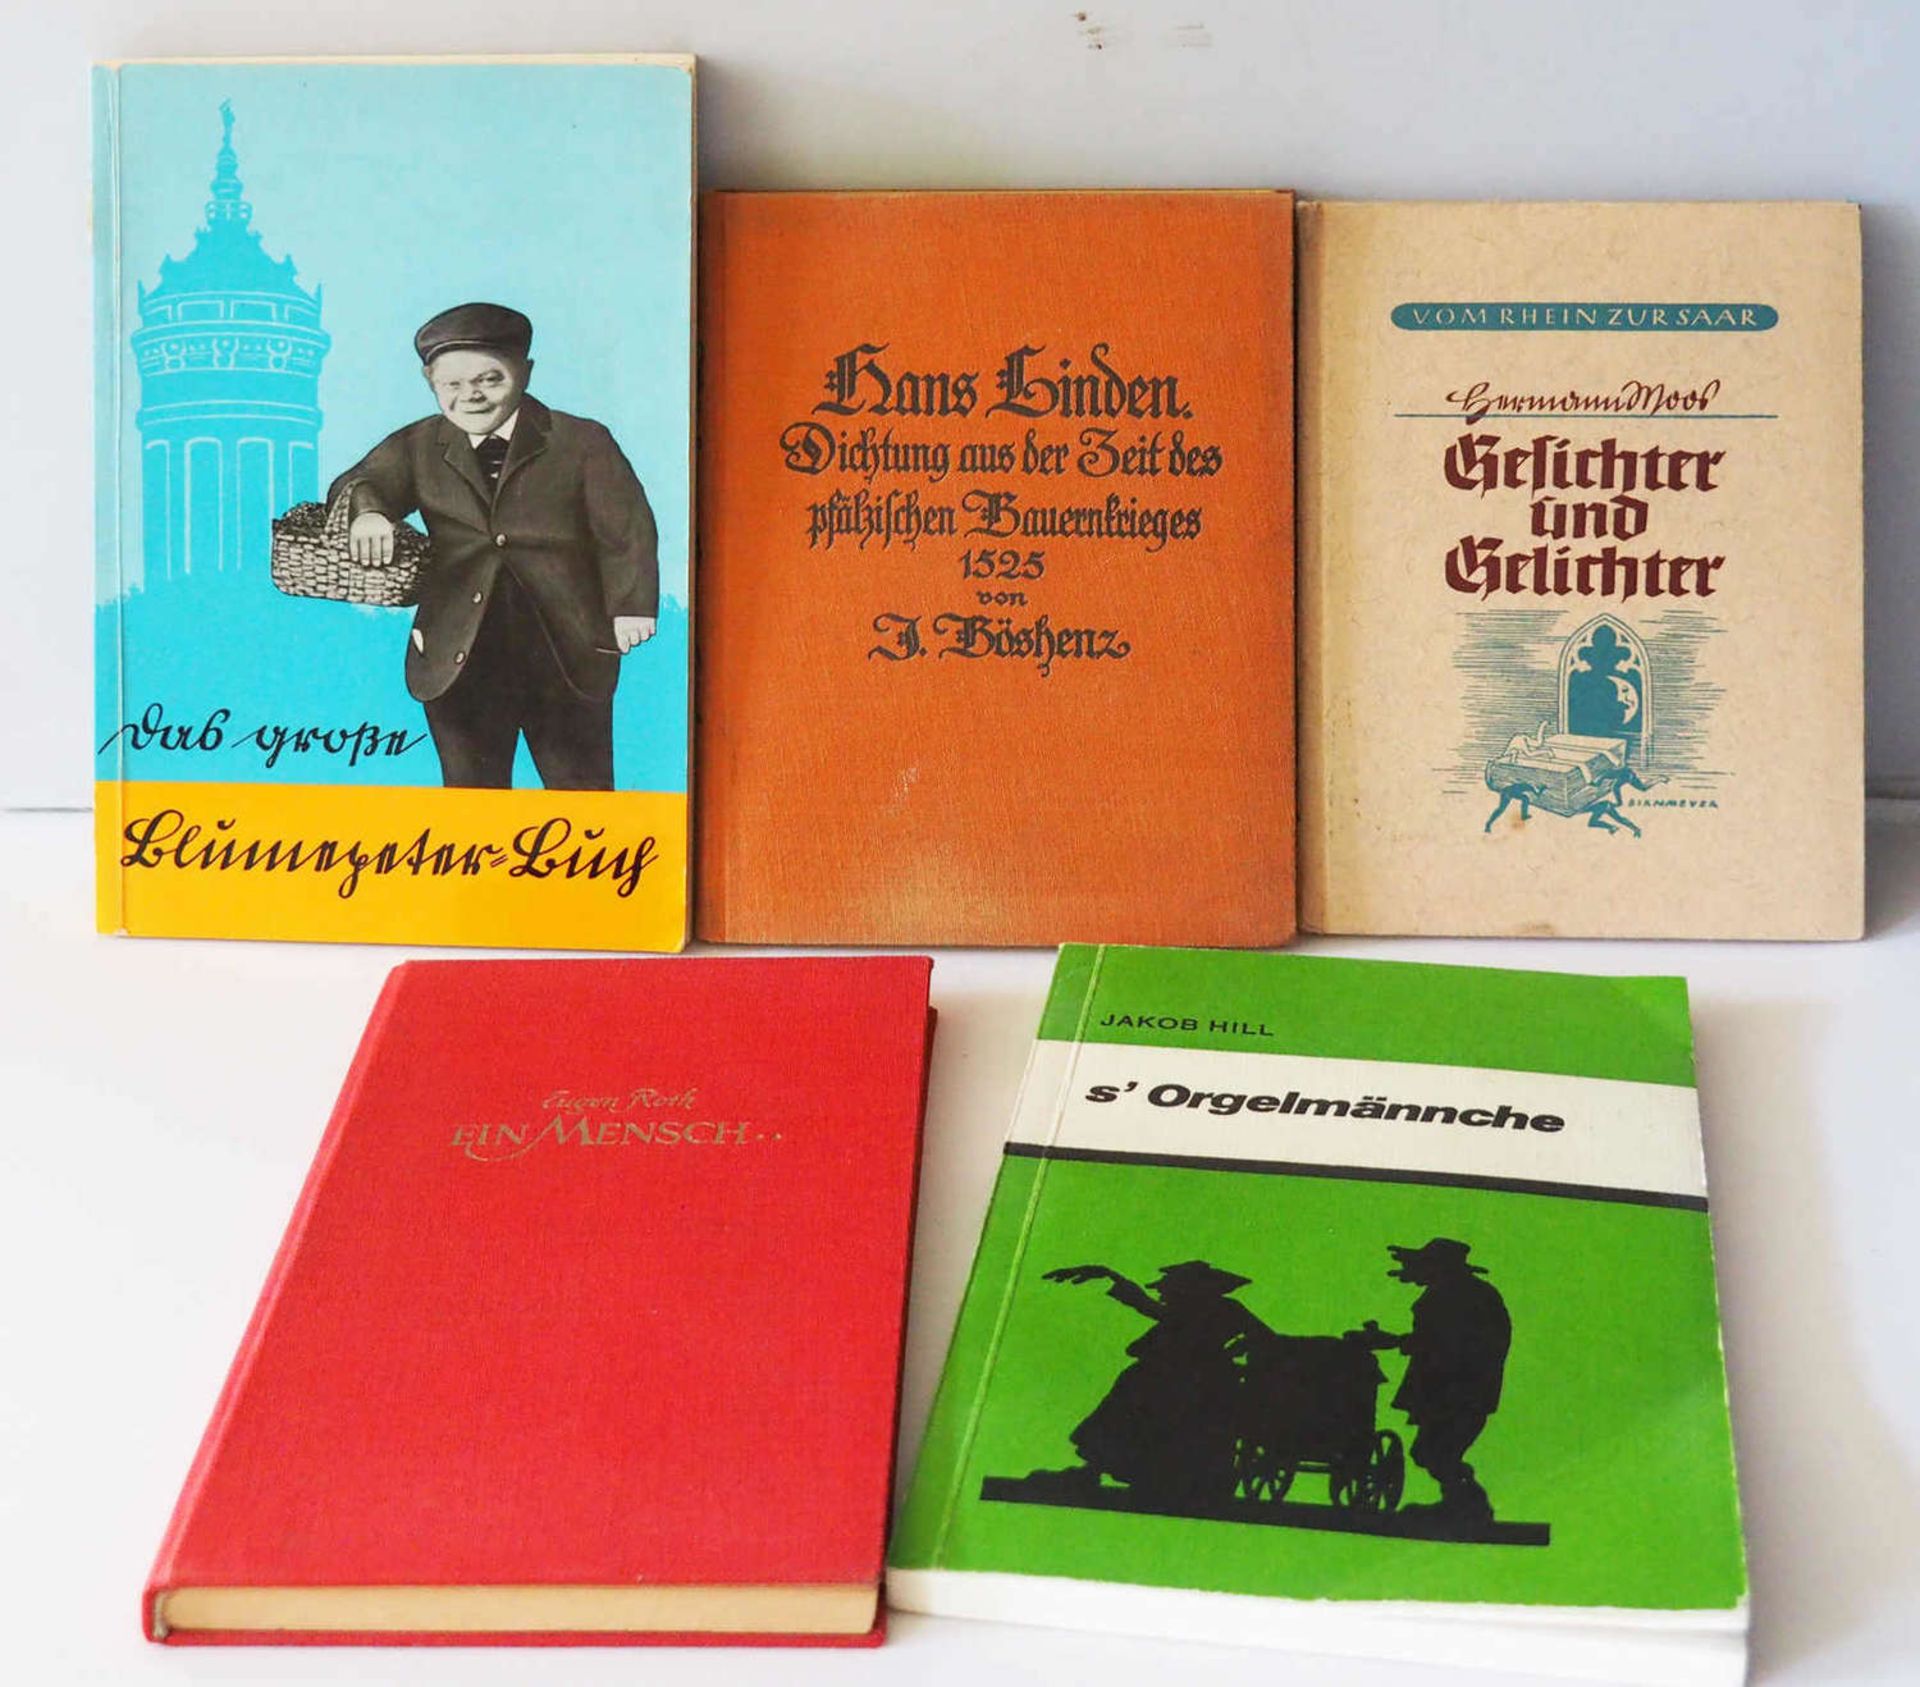 Mixed lot of books, concerning the Palatinate dialect, consisting of: 1. Adam Schölb, "Das große